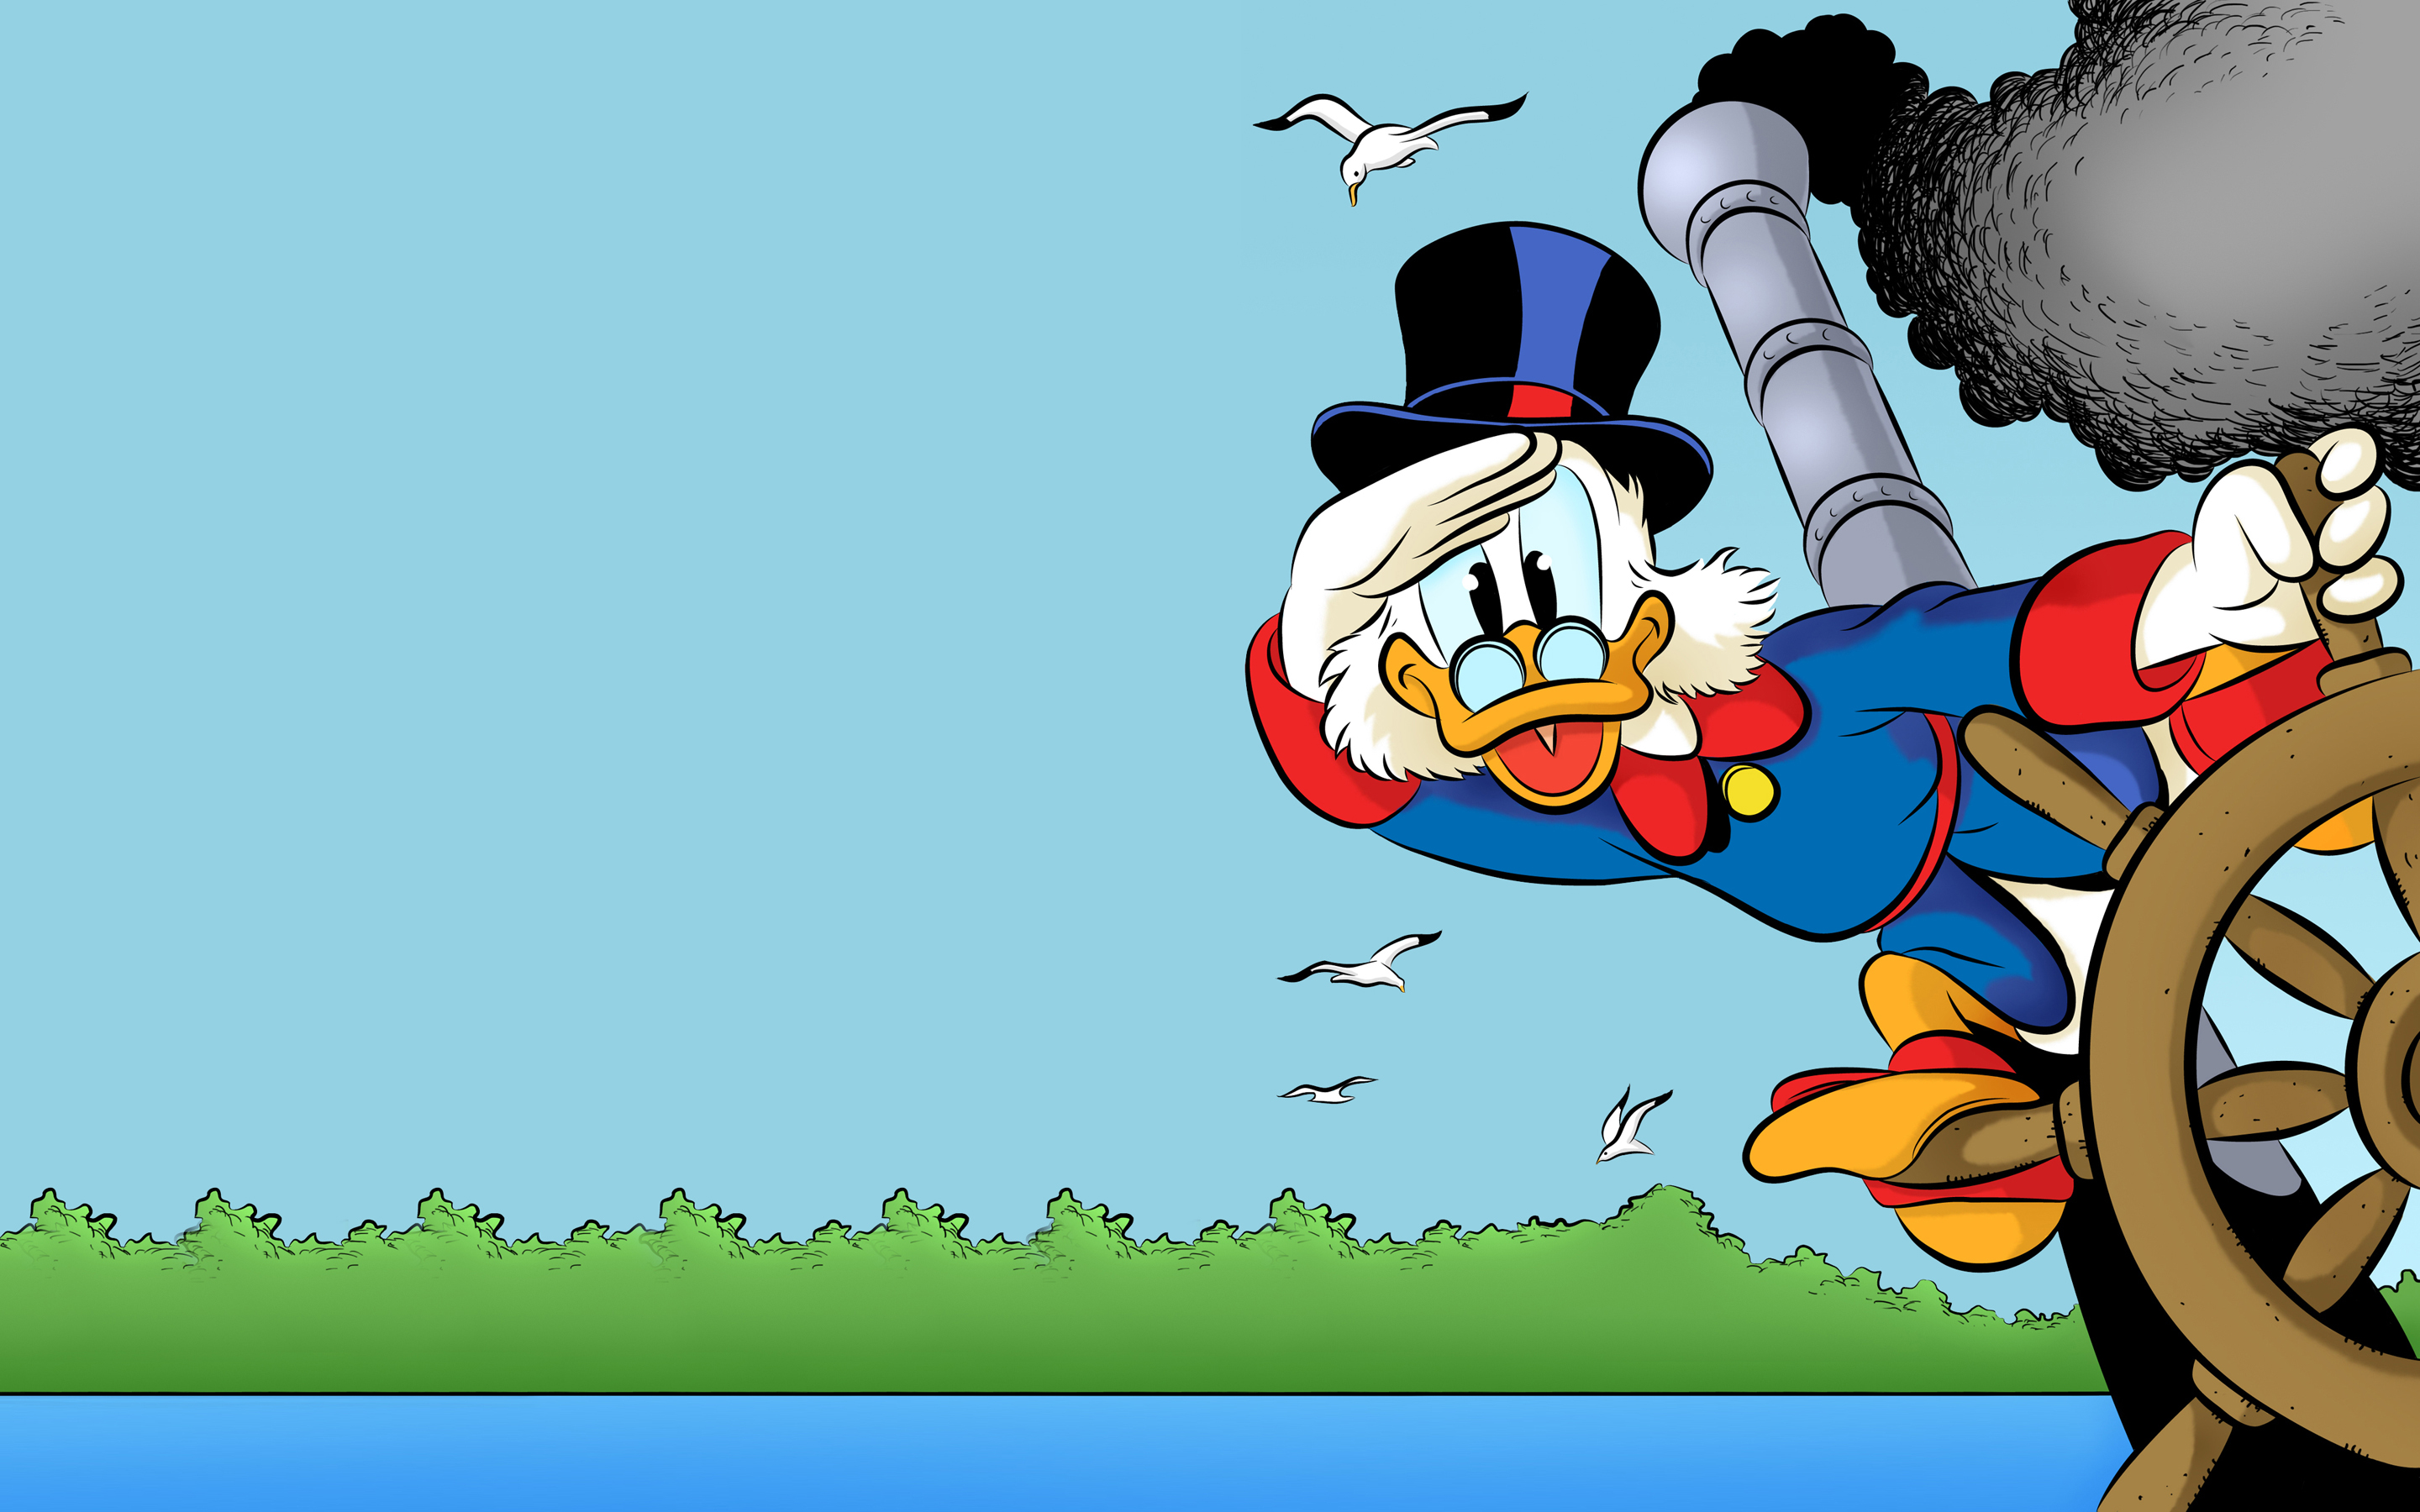 scrooge mcduck, comics, the life and times of scrooge mcduck, ducktales